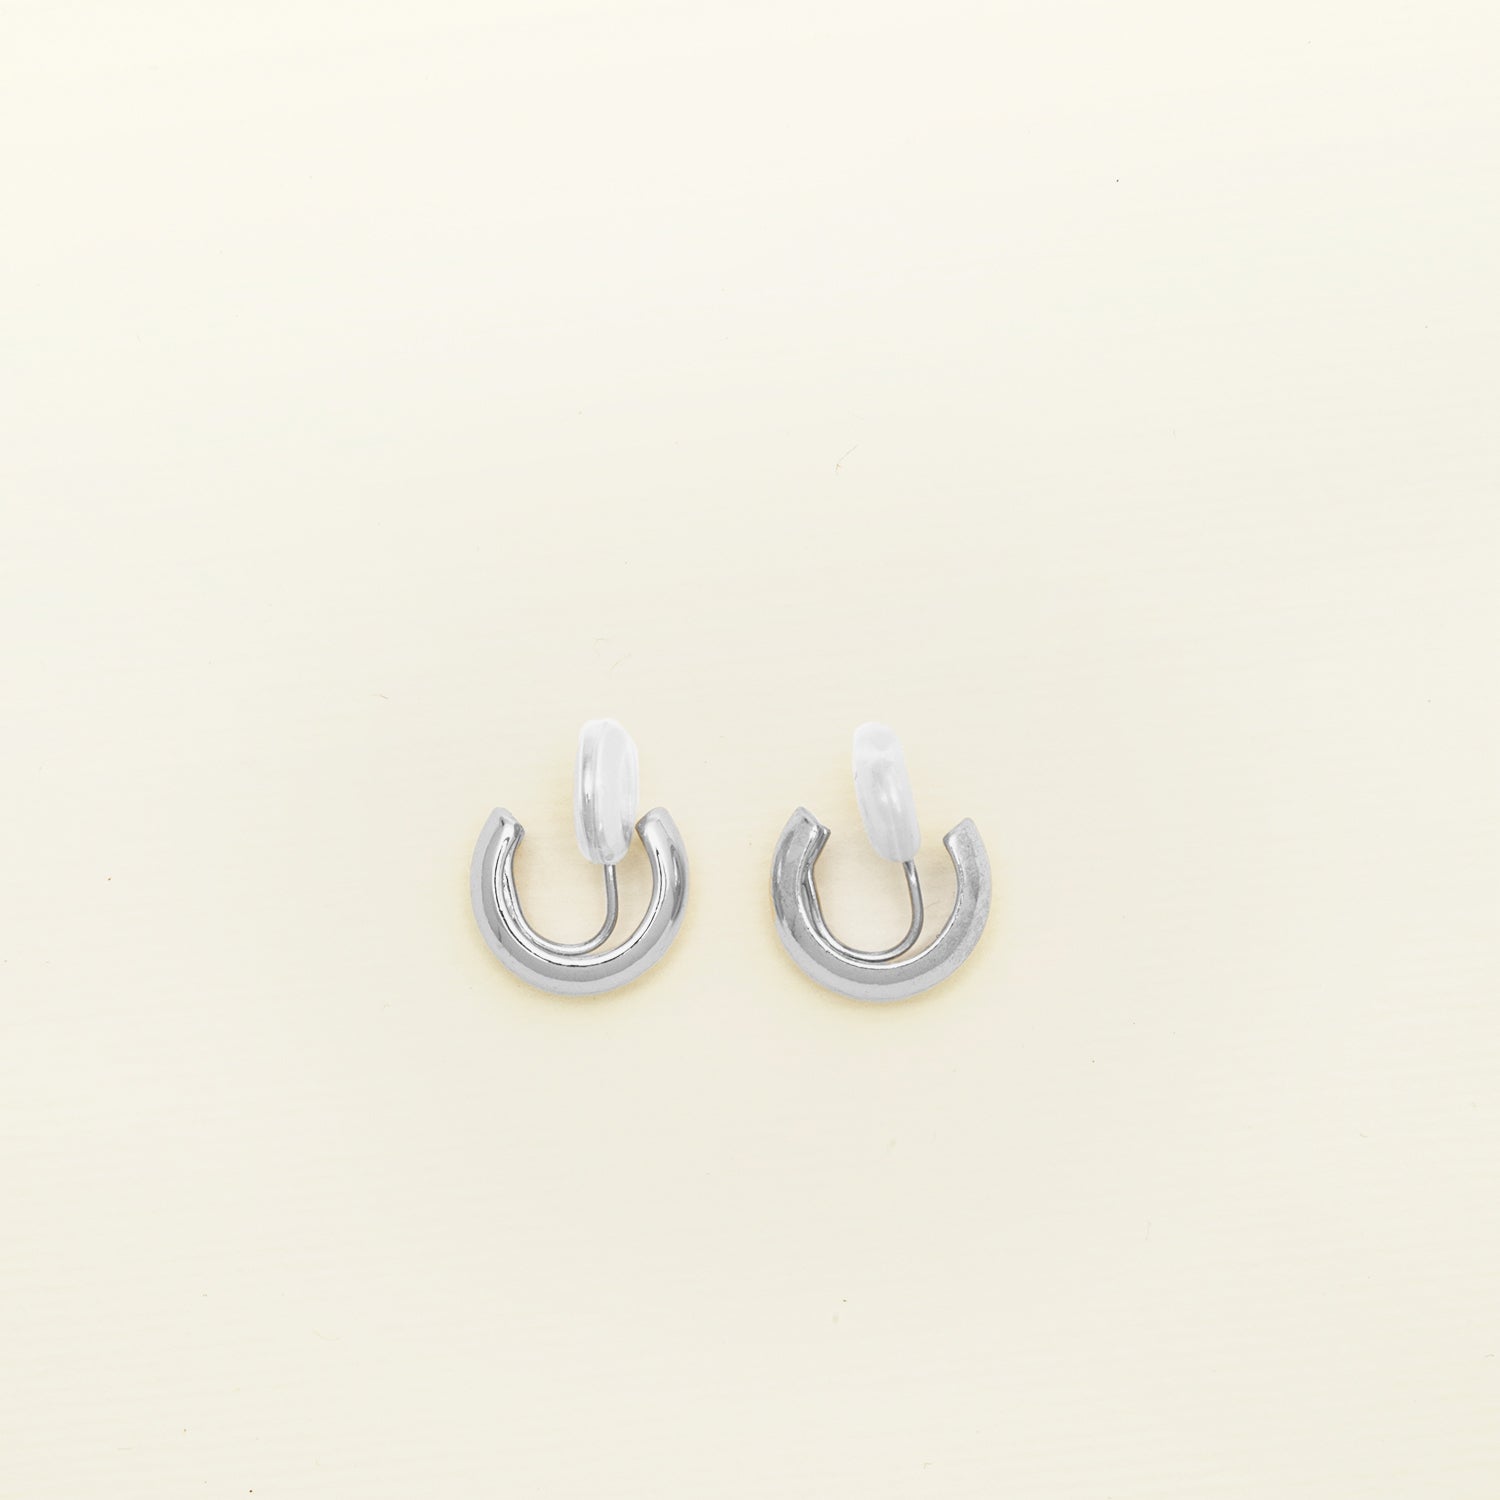 Image of the Simple Silver Huggie Clip-On Earrings provide a medium secure hold, making them perfect for all ear types. With adjustable padding for extra comfort, these earrings can be worn for up to 24 hours with ease. Crafted from copper alloy, they are also available in a gold finish.